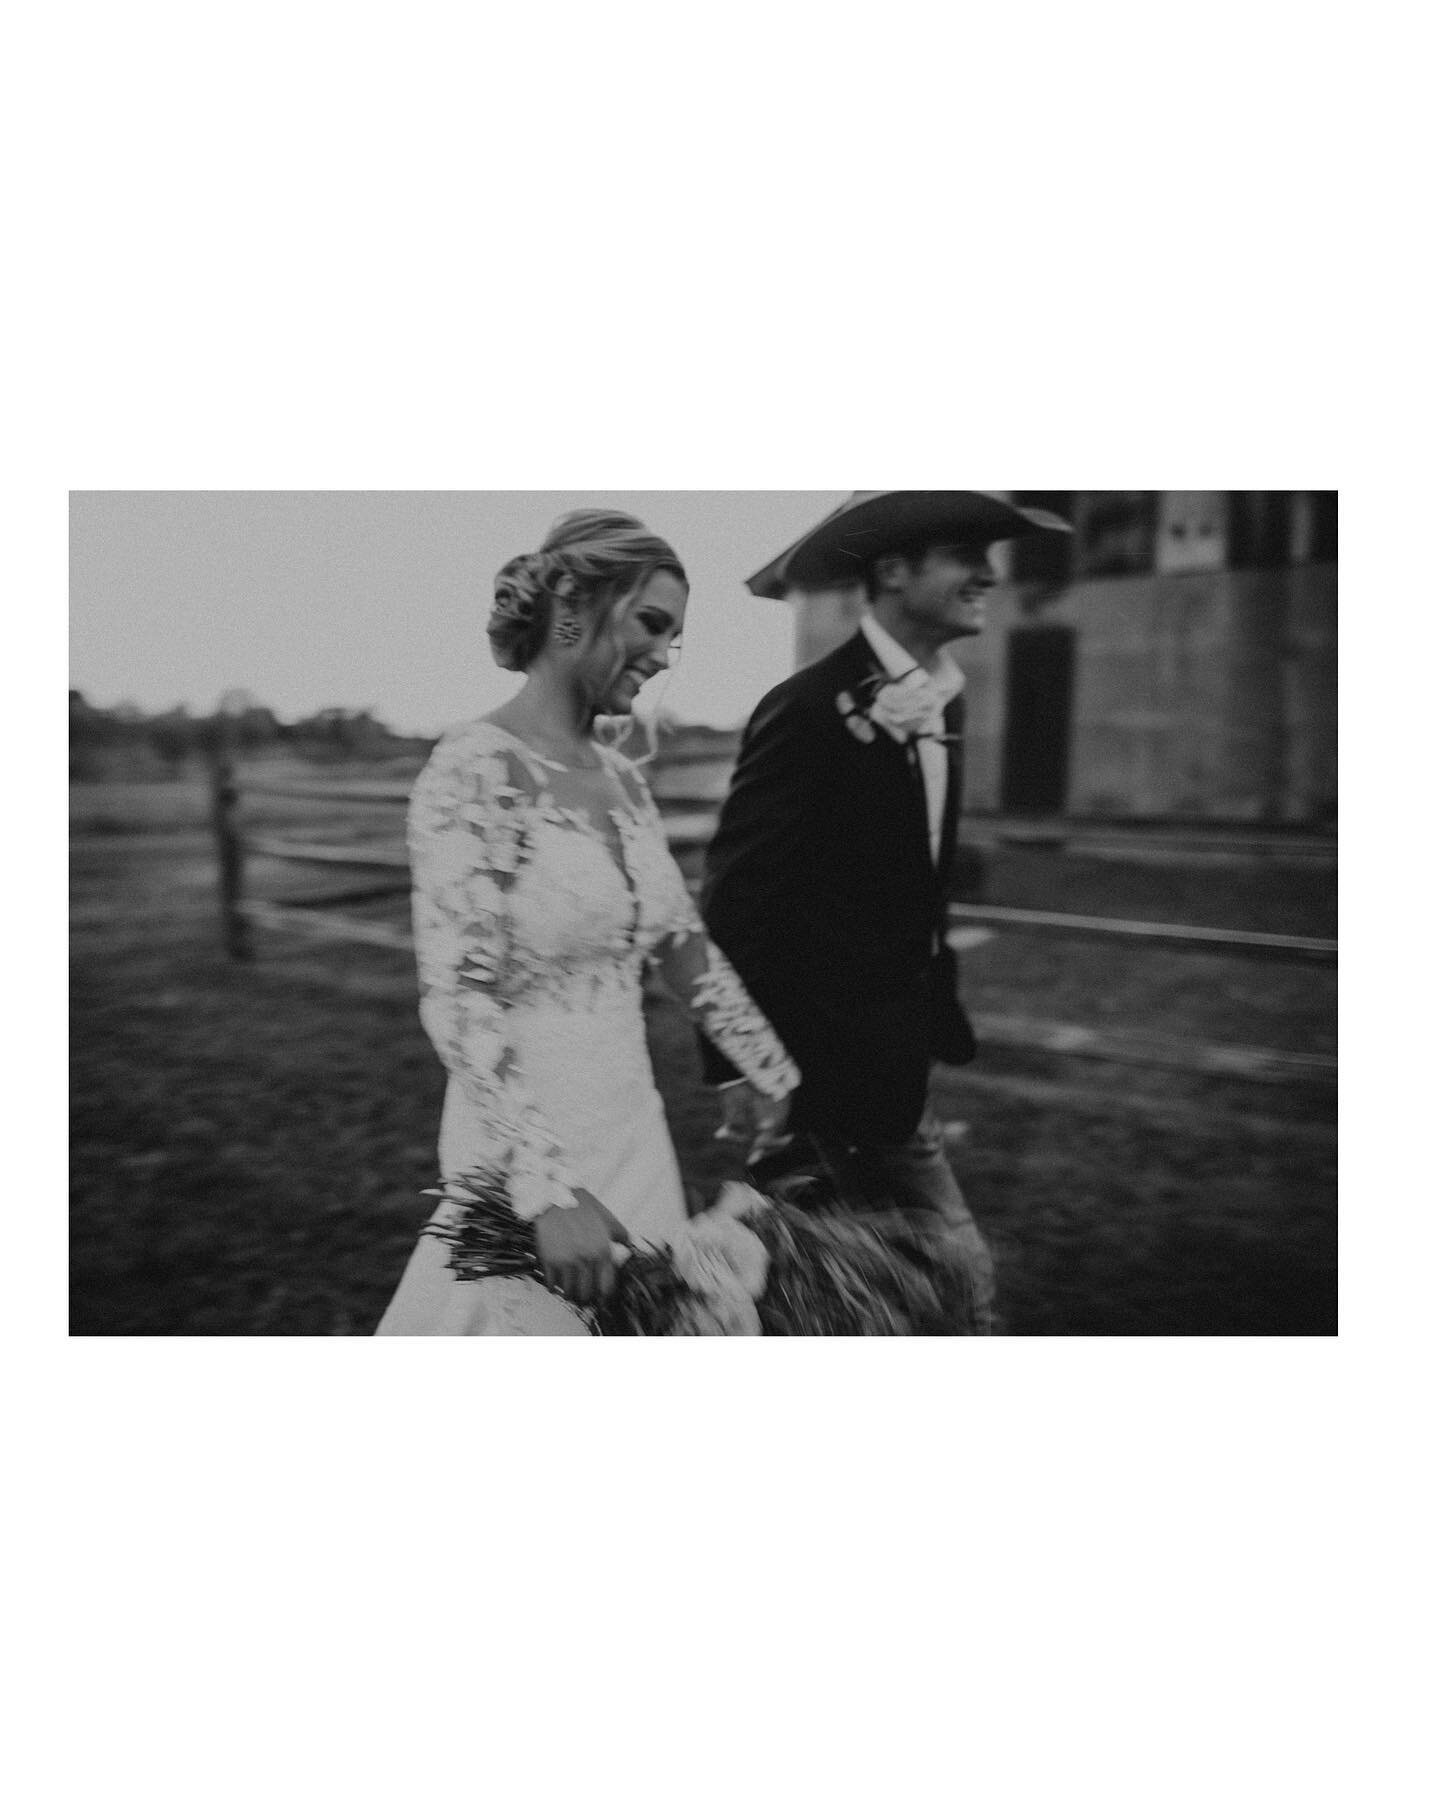 For as much a blur as your wedding day can seem, it&rsquo;s always the photos that allow you to be right back in those intimate and personal moments.  The unplanned, unposed. Those moments are always alive again&hellip; in the photos